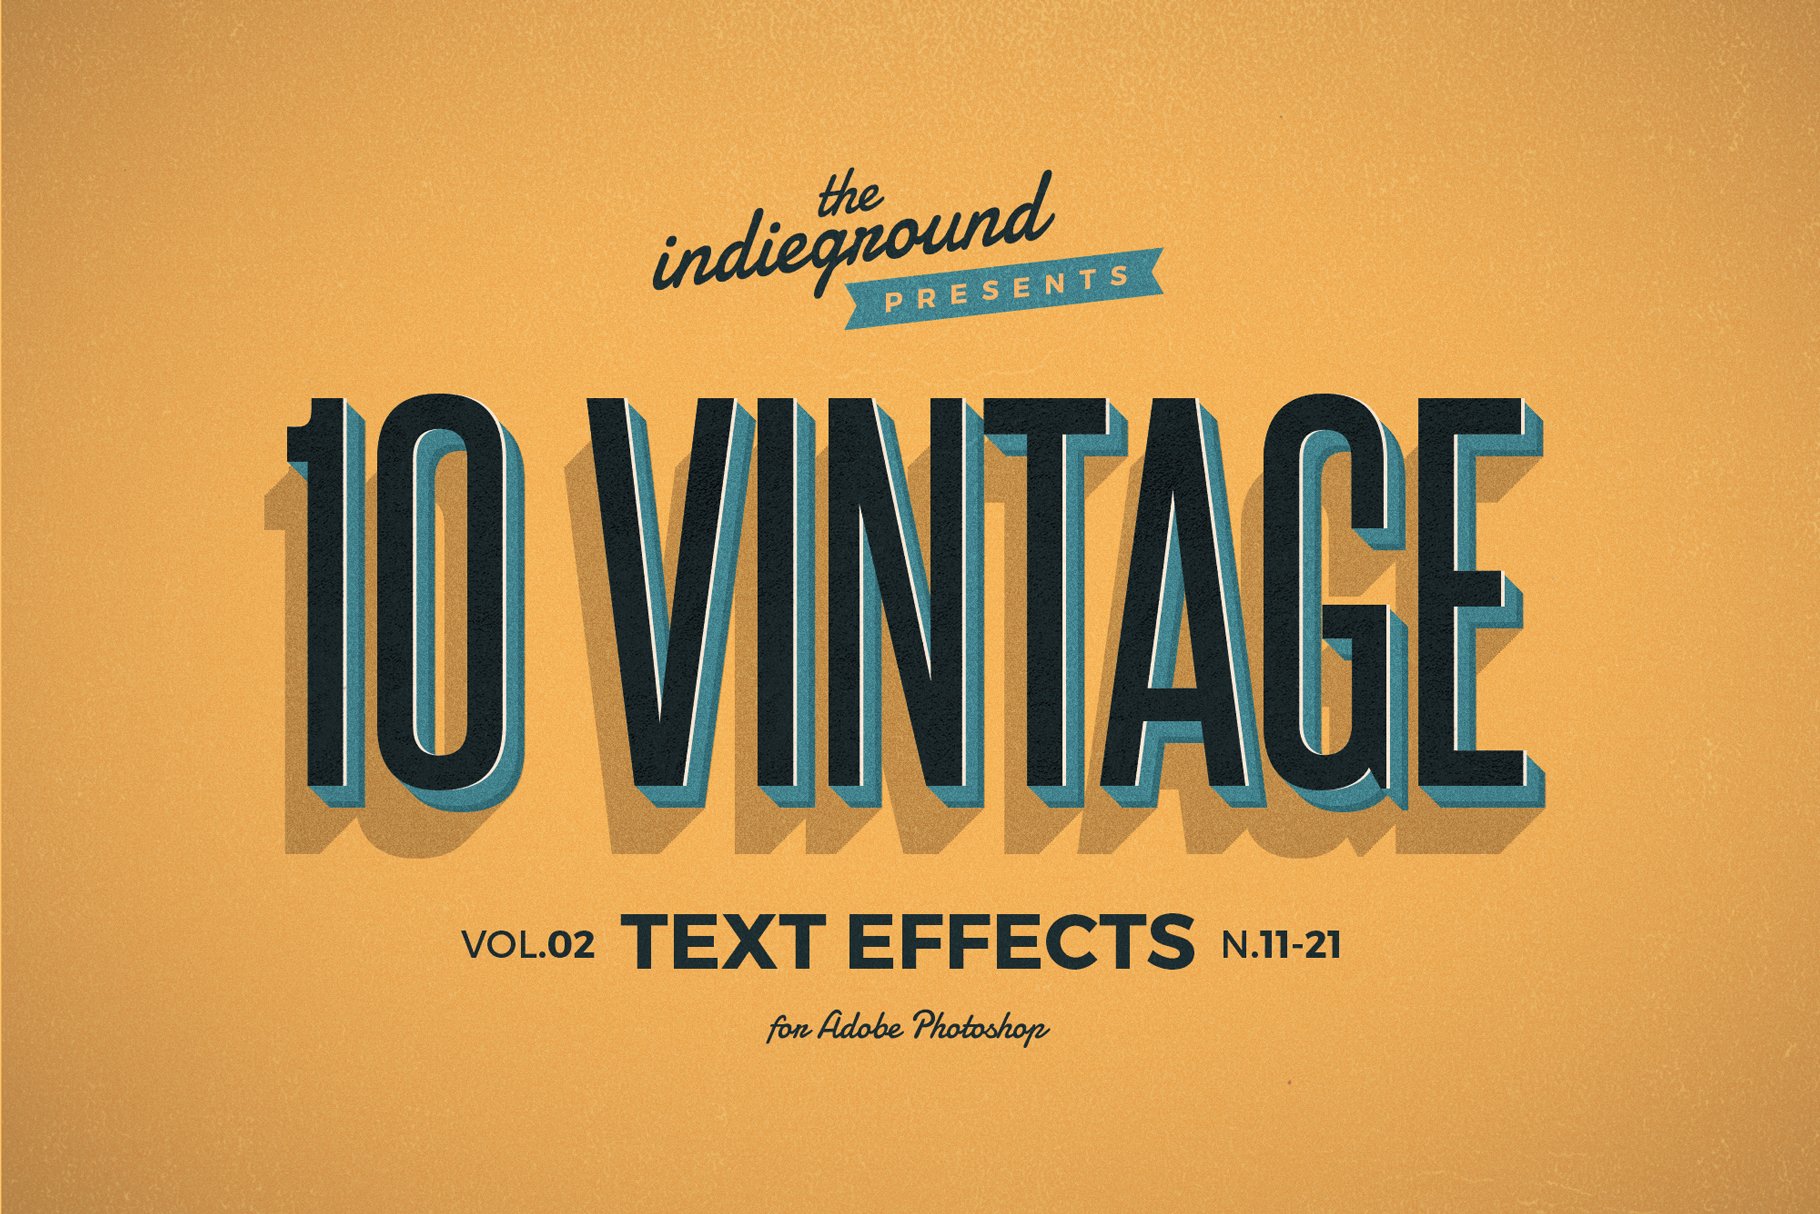 Retro Text Effects Vol.2cover image.